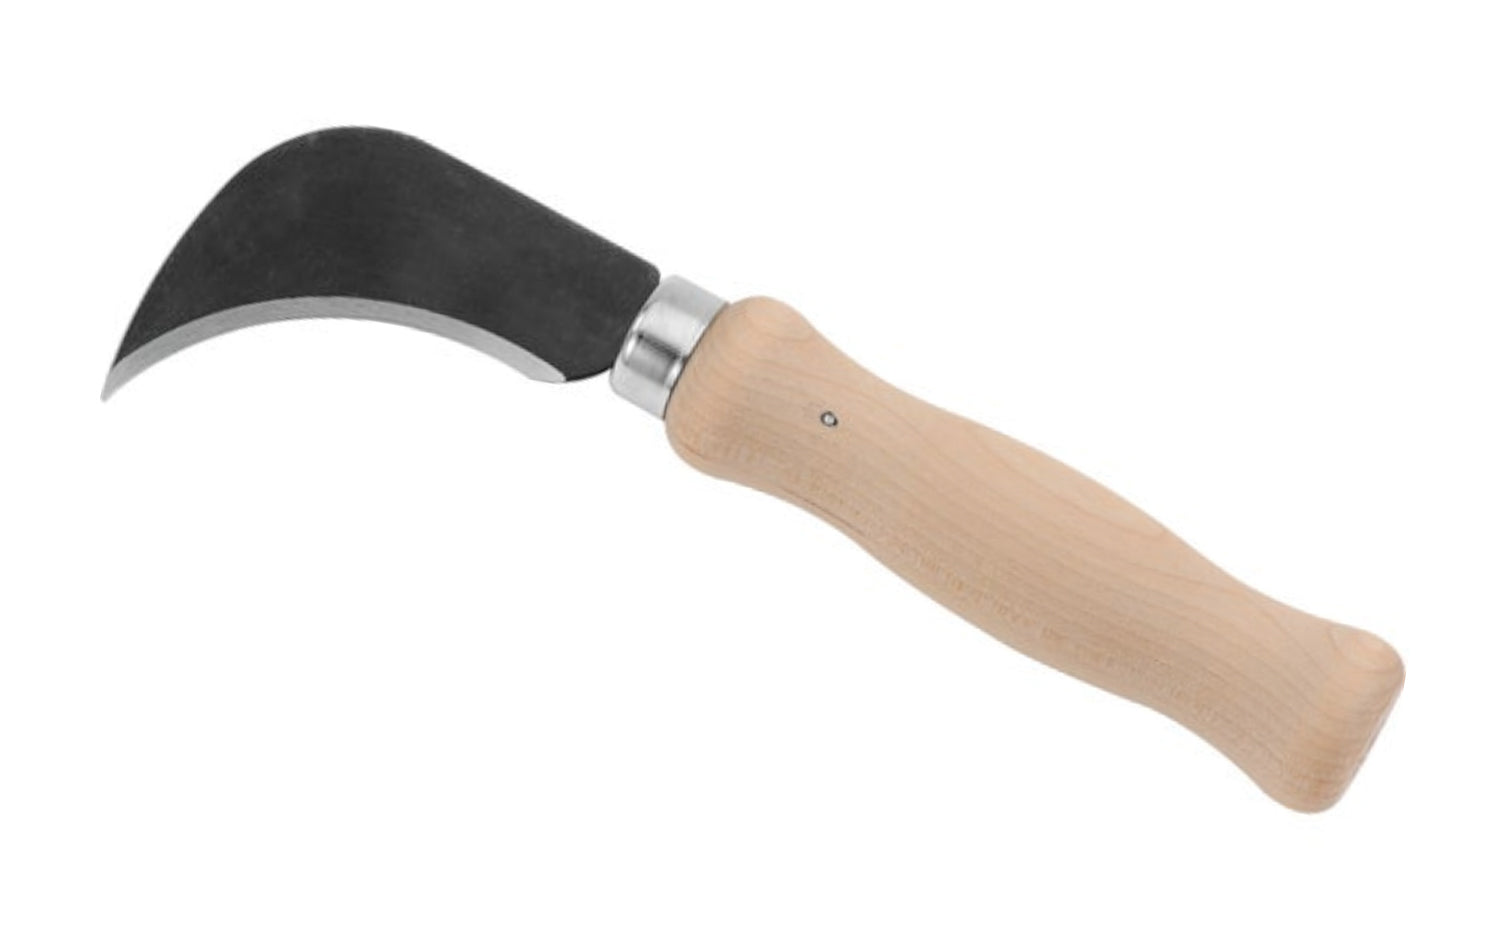 This Stanley Linoleum Knife is for cutting & trimming vinyl or linoleum floor covering, roofing, and similar material. Taper ground cutlery steel blade permanently fastened to comfortable hardwood handle. 6" overall length. Model 10-509. 